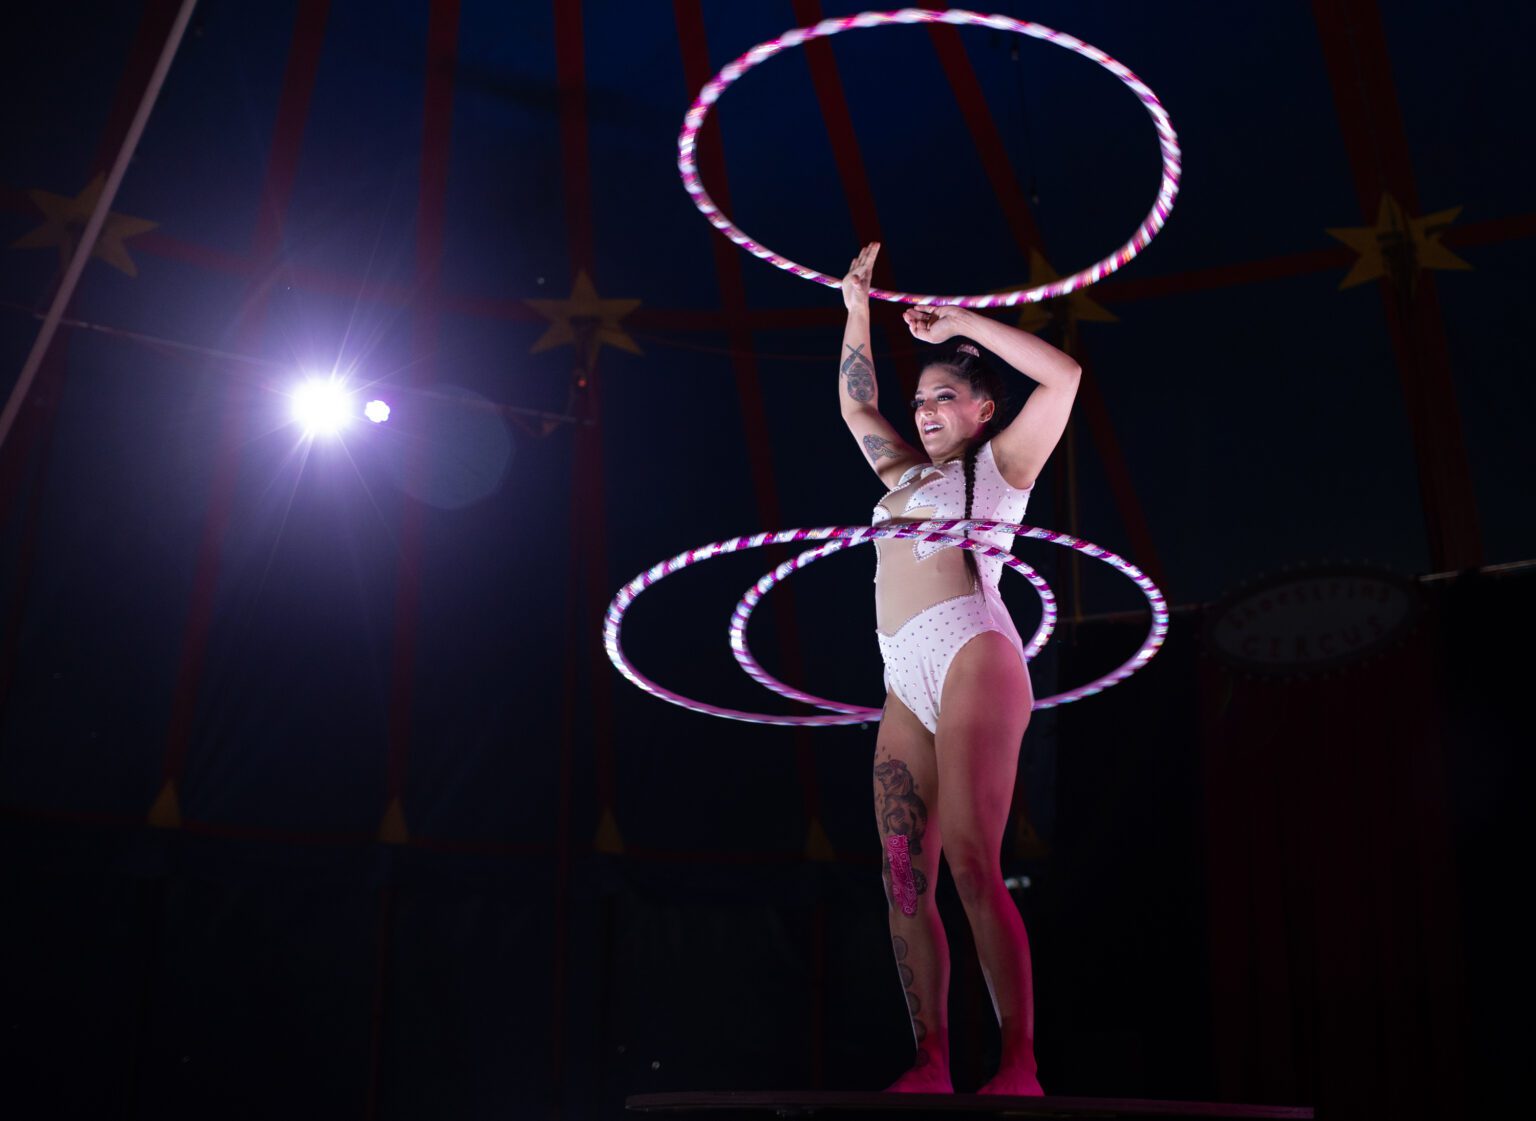 The Flying Brain — Stephanie Little Thunder Morphet-Tepp — performs with hula hoops May 18 onstage at the Shoestring Circus. The new circus will continue Friday